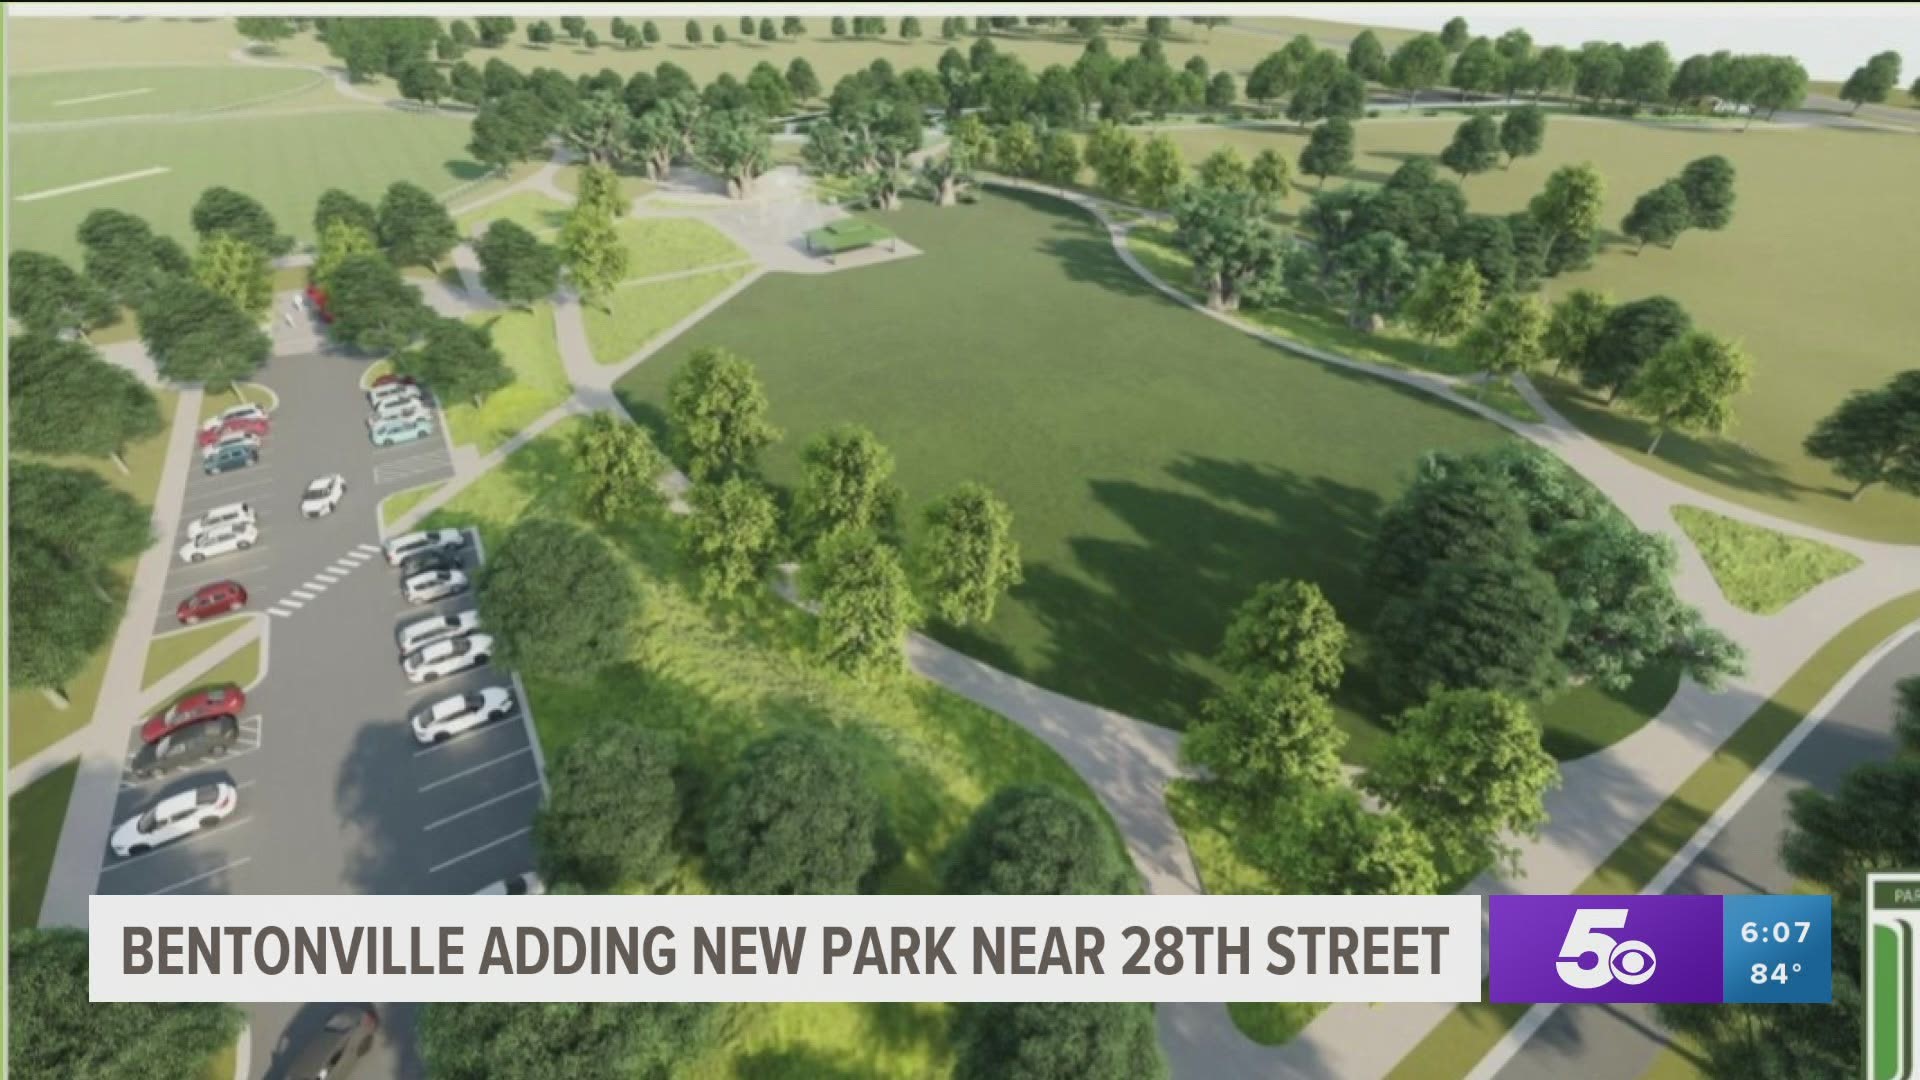 The City of Bentonville hopes the new park will attract it's younger residents.